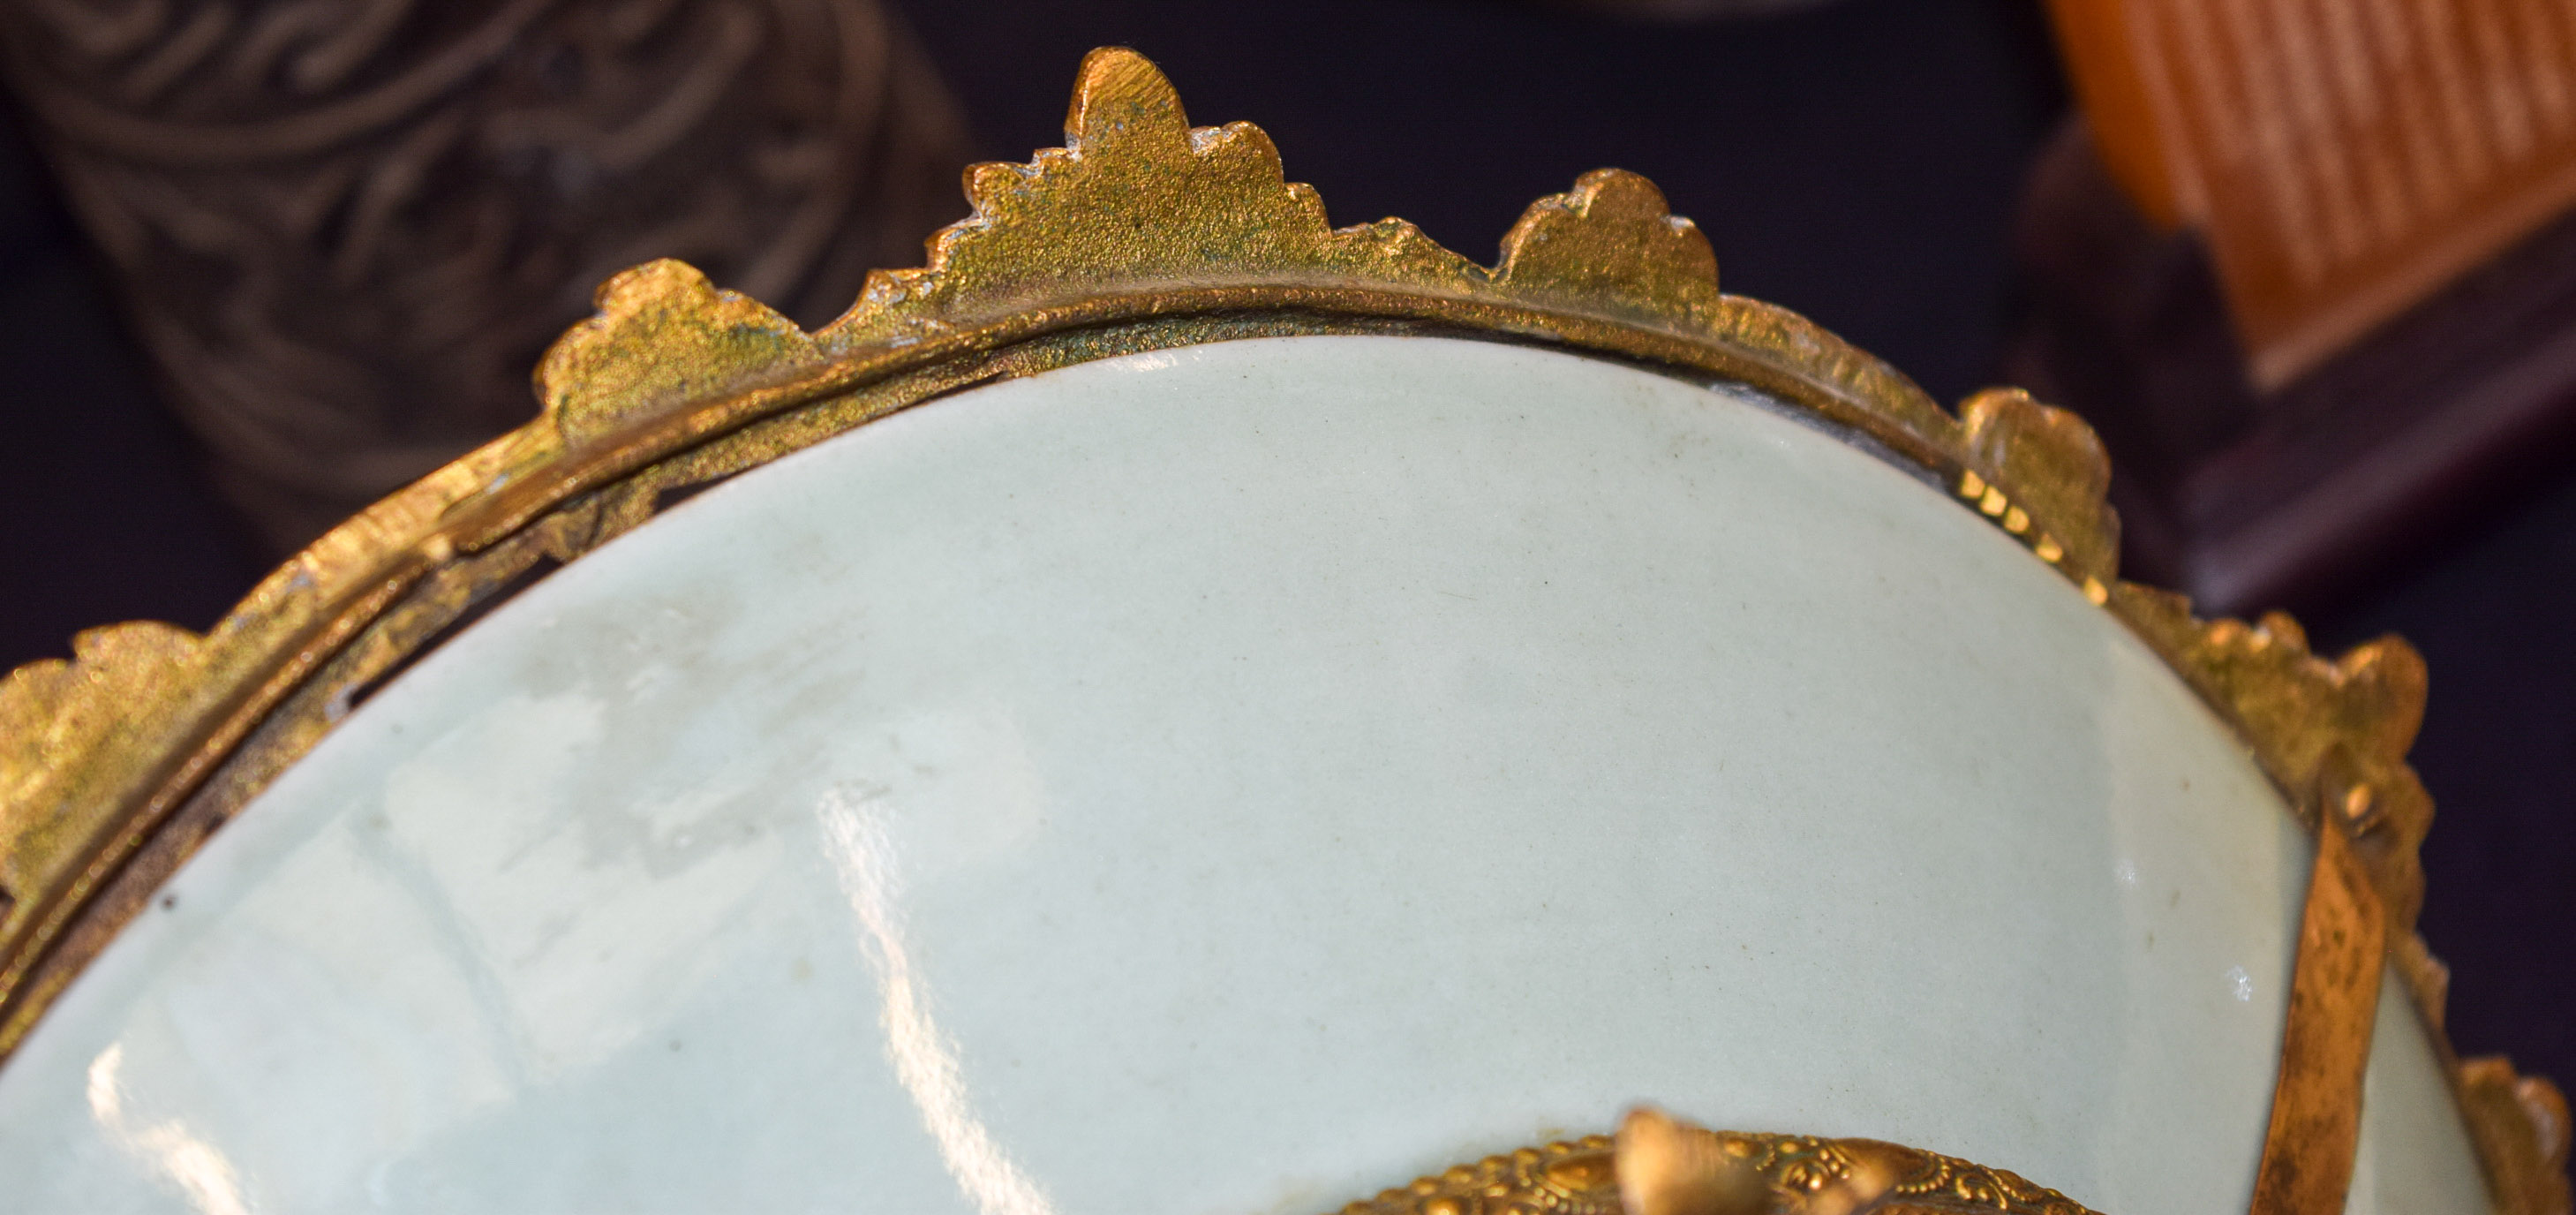 A 19TH CENTURY CHINESE CELADON FAMILLE ROSE PLATE with French bronze ormolu mounts. 28 cm x 24 cm. - Image 8 of 8